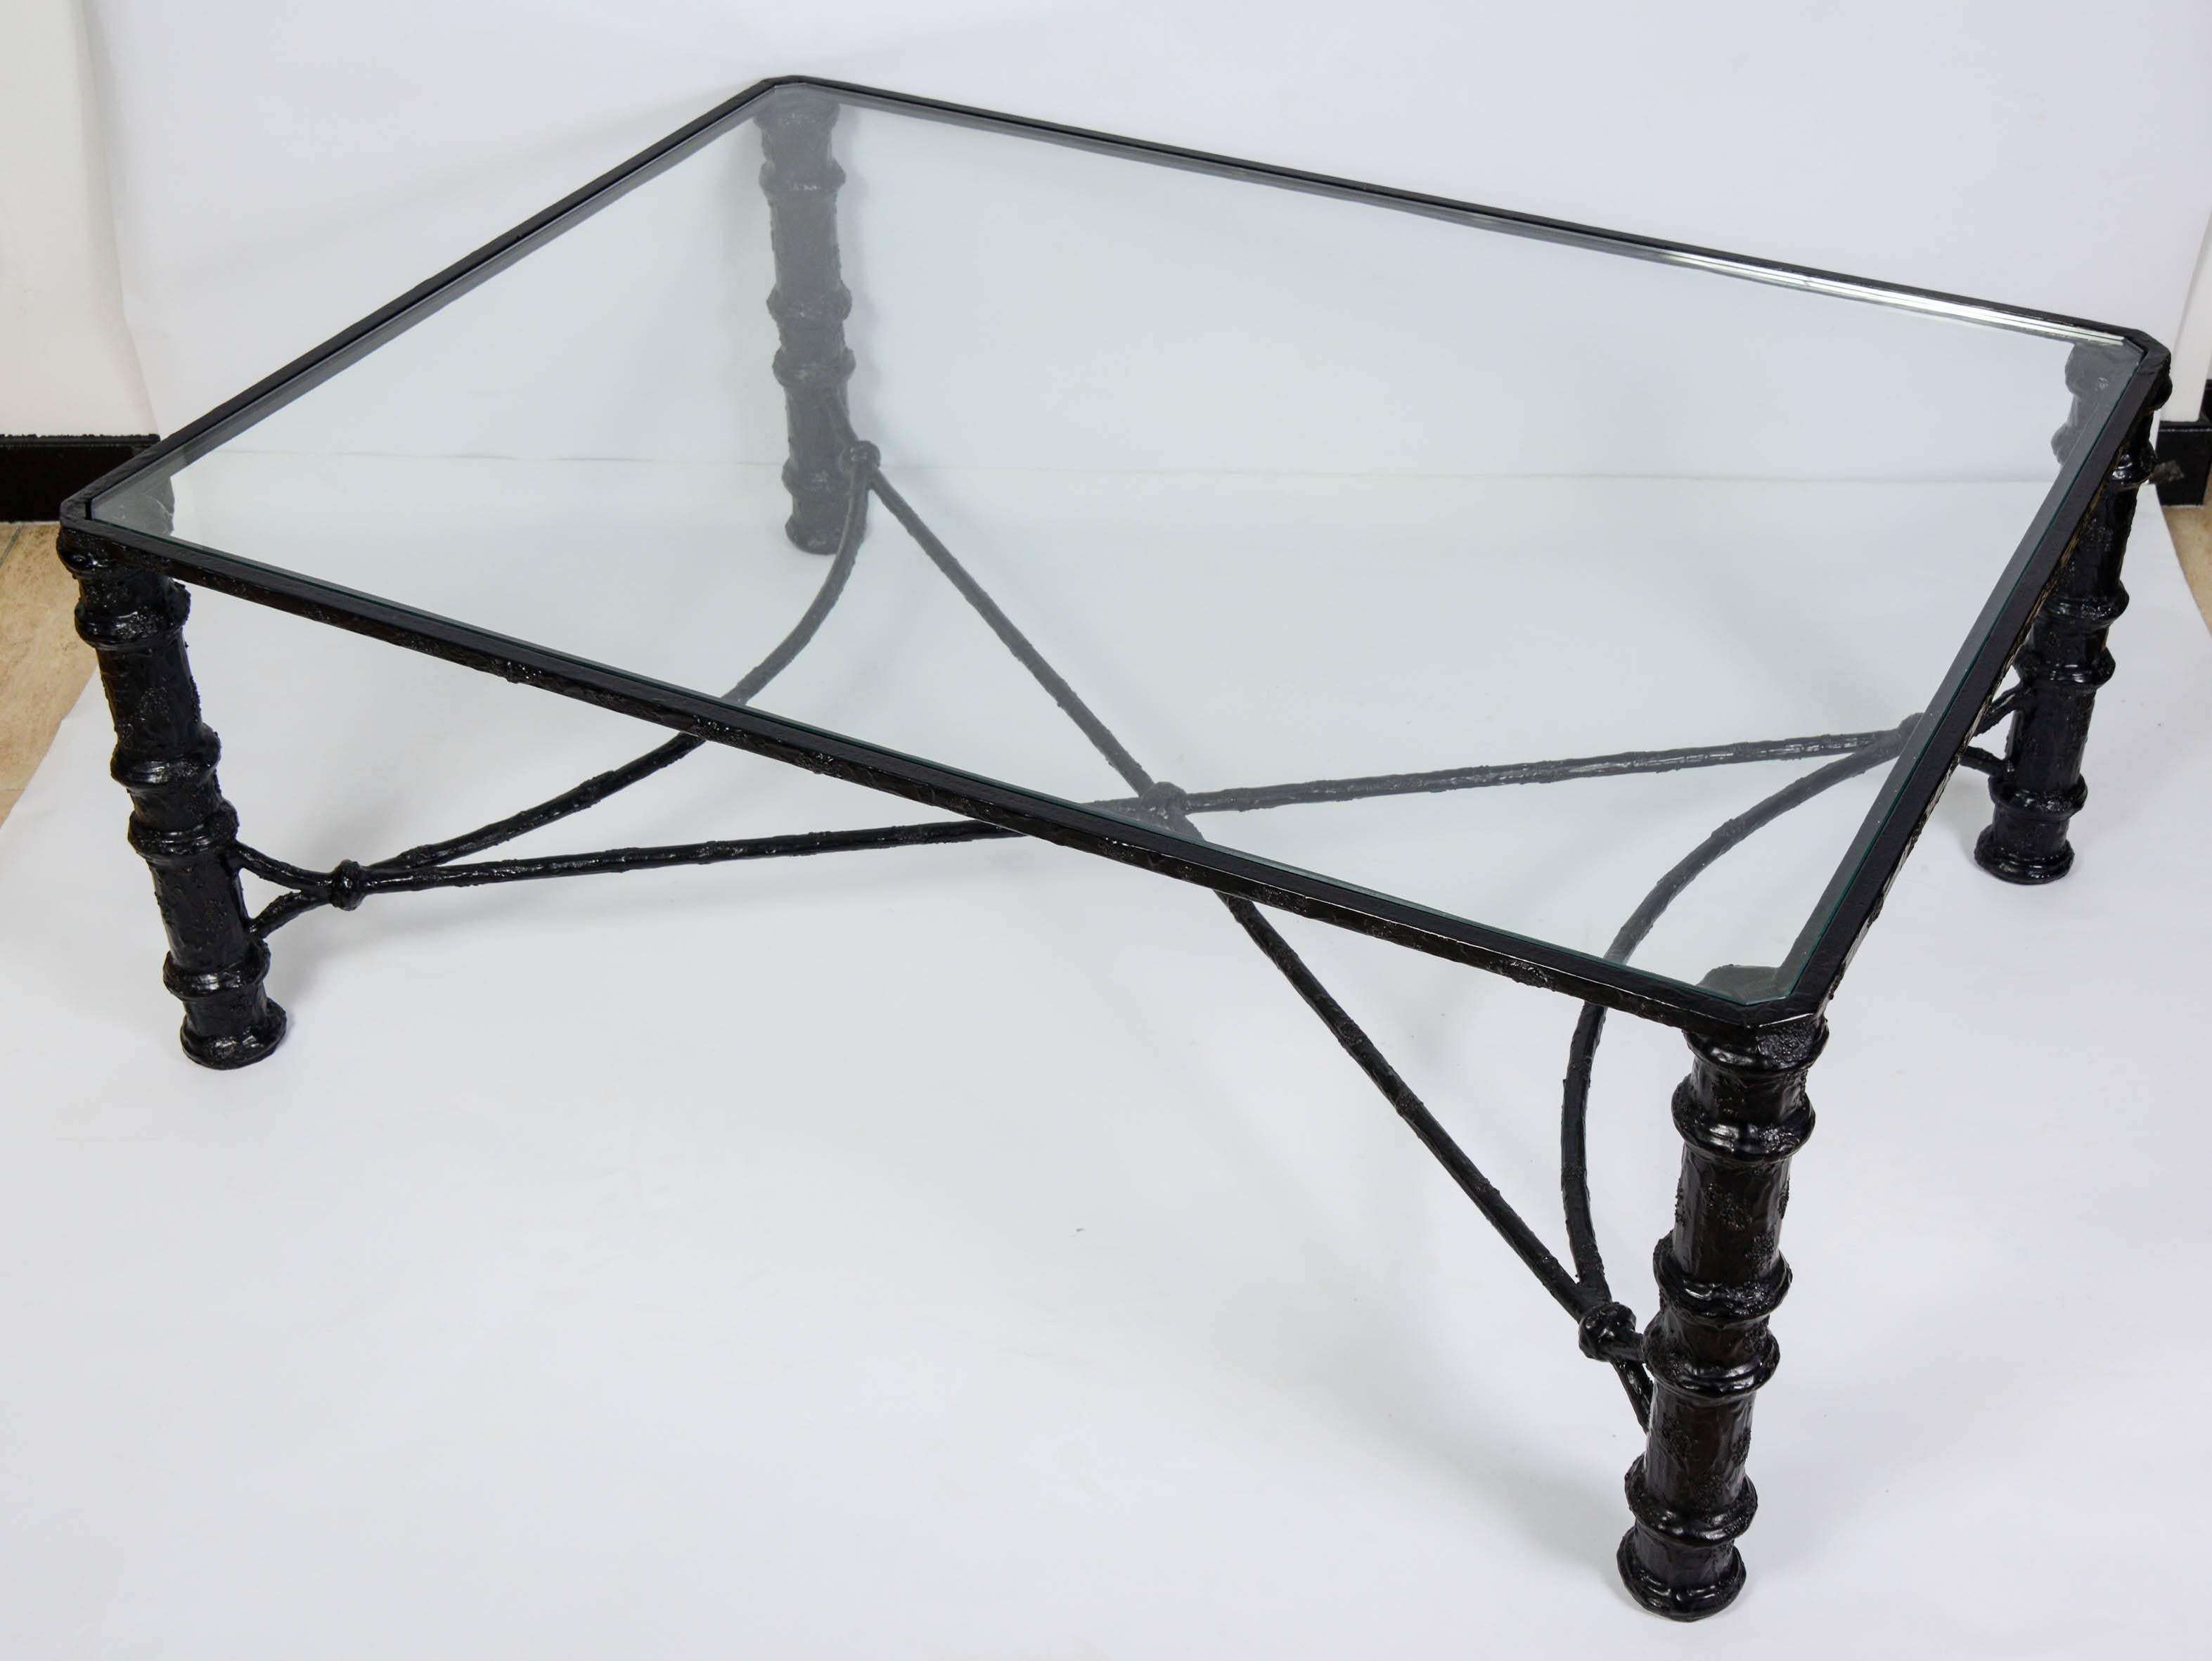 Darkened metal coffee table and patina in light relief.
Top in clear glass,
circa 1950.